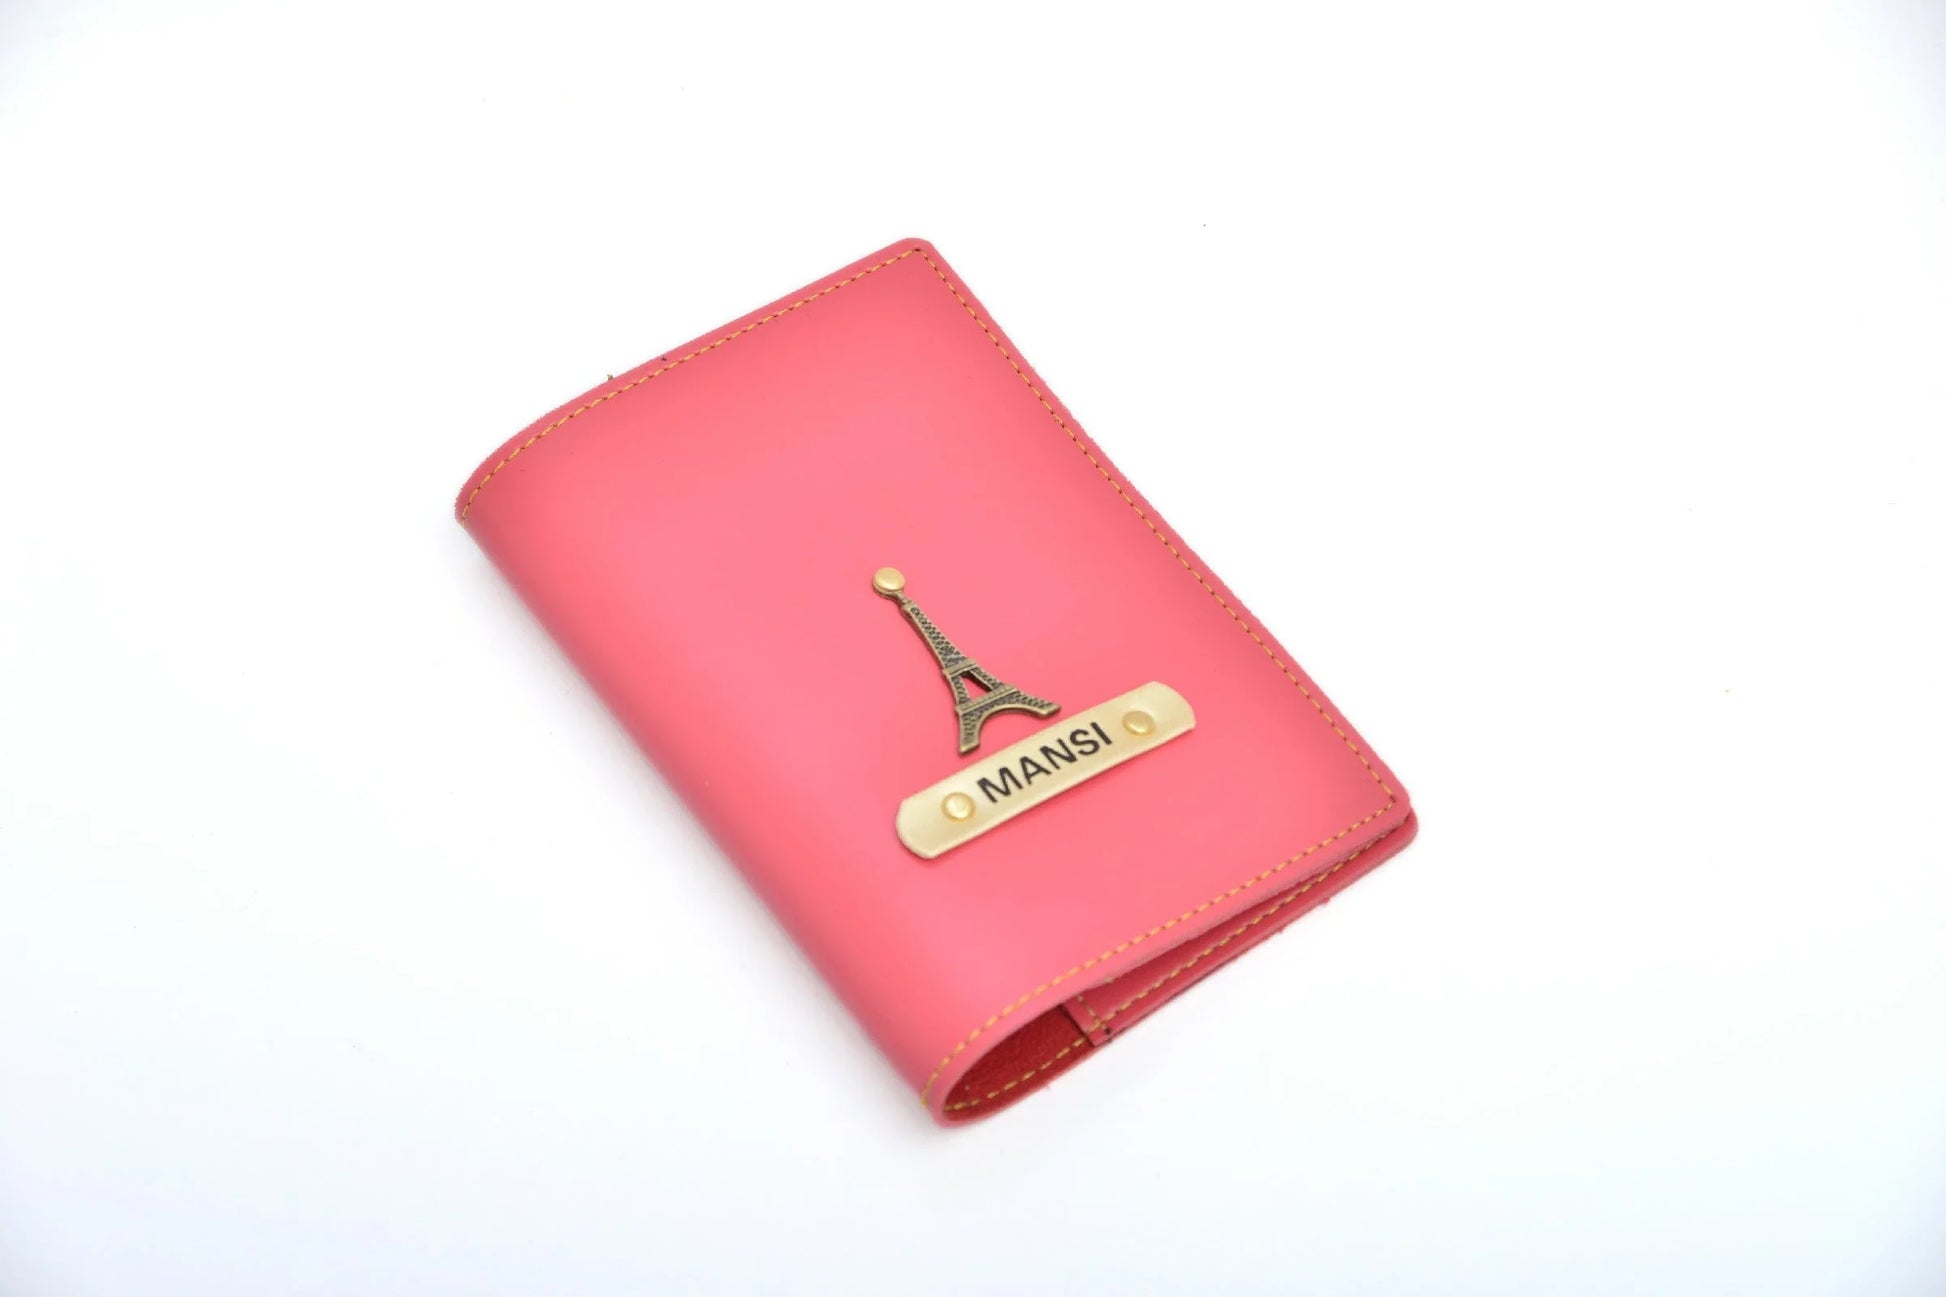 personalized-passport-cover-pink-customized-best-gift-for-boyfriend-girlfriend.The best part is that faux, synthetic leather is very durable. It is not prone to crack or peel like leather. Always be trending and in fashion with our customized passport case.